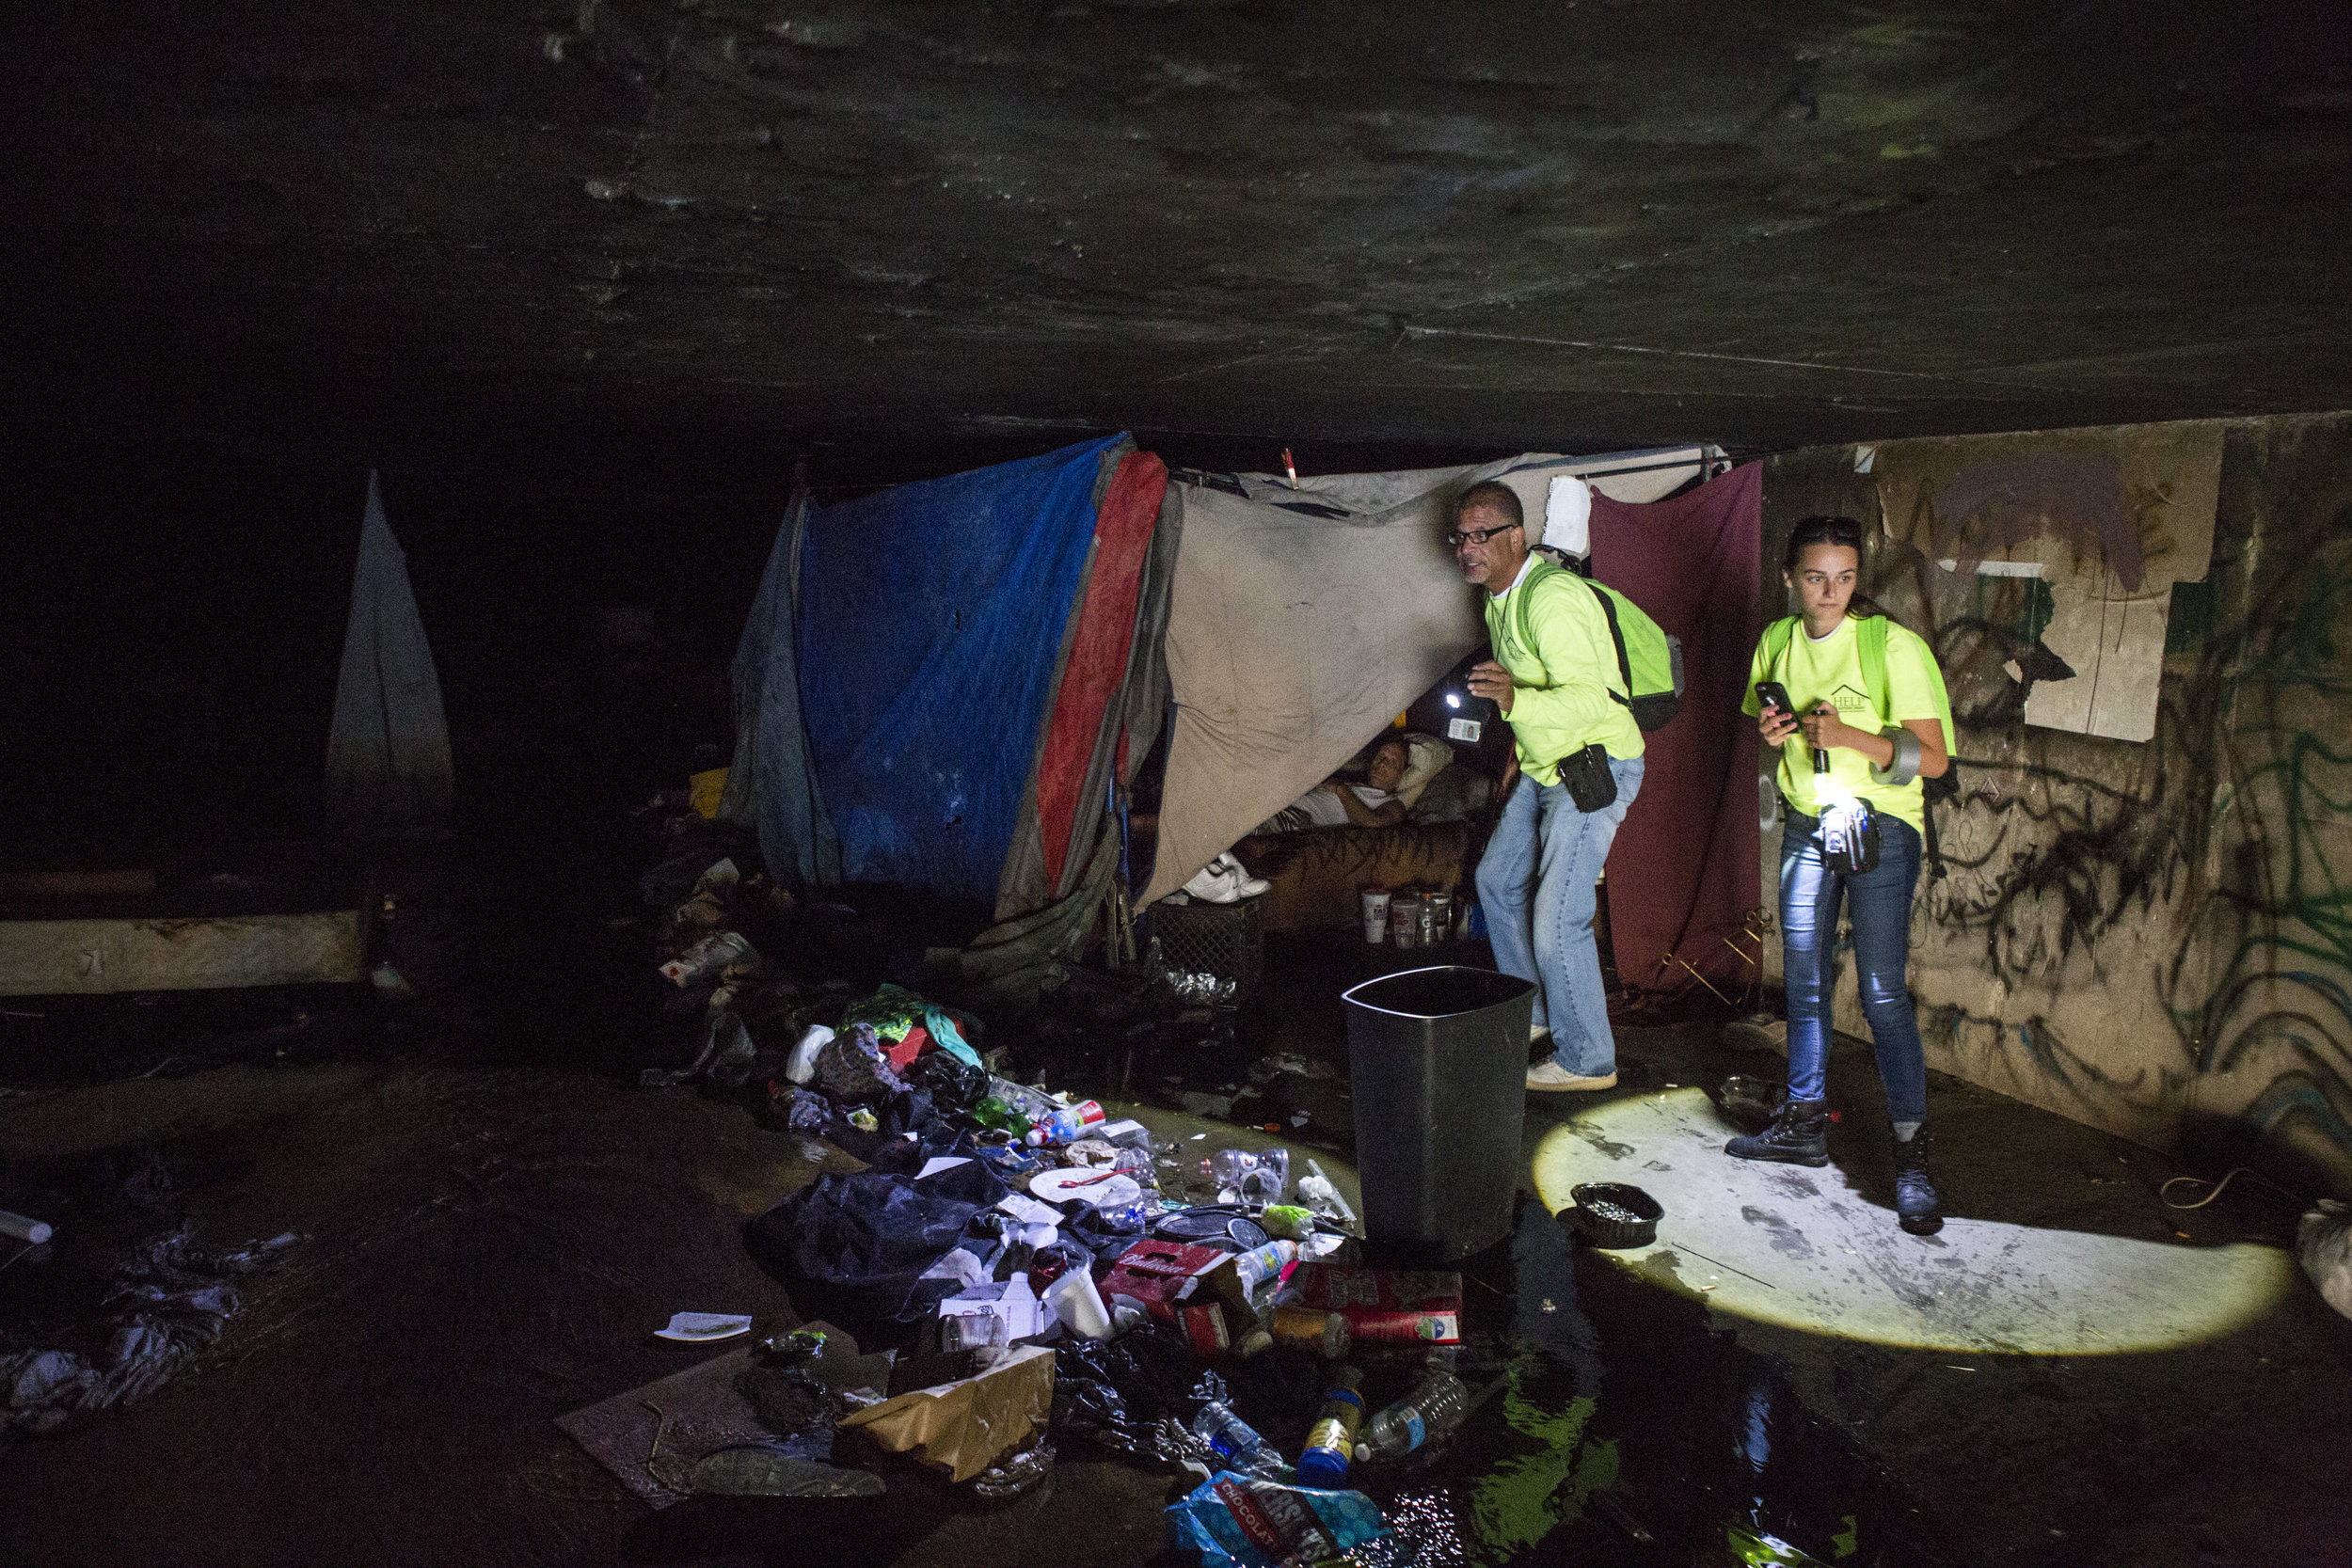  HELP of Southern Nevada employees Louis Lacey and Hayli Petcoff check on a homeless man in a flood tunnel near the Hard Rock Hotel and Casino on Tuesday, June 27, 2017. After two homeless people died in early monsoon rains the previous year, Lacey a